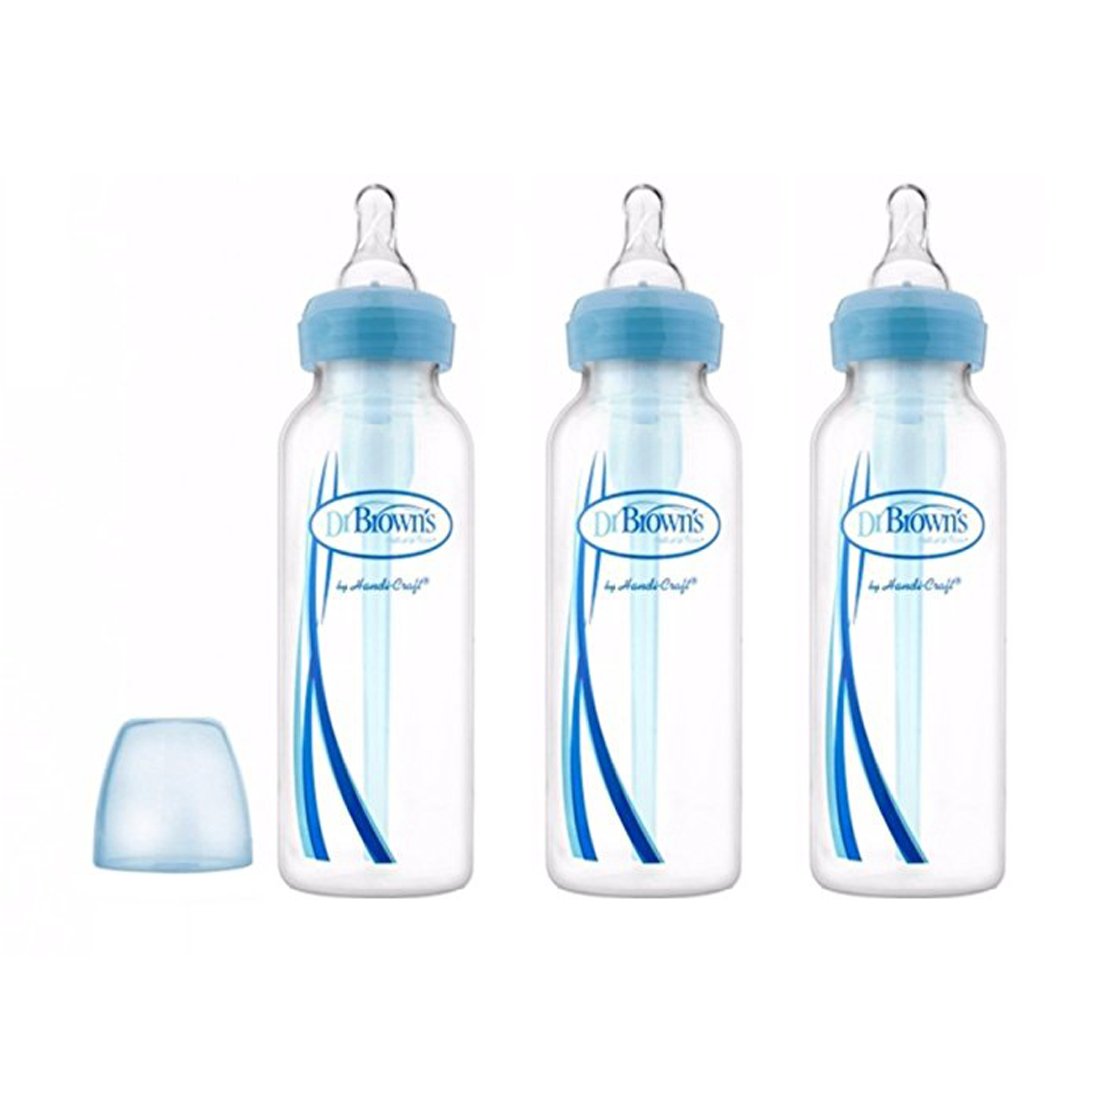 Dr. Brown's Natural Flow® Anti-Colic Options+™ Narrow Baby Bottle, with  Level 1 Slow Flow Nipple